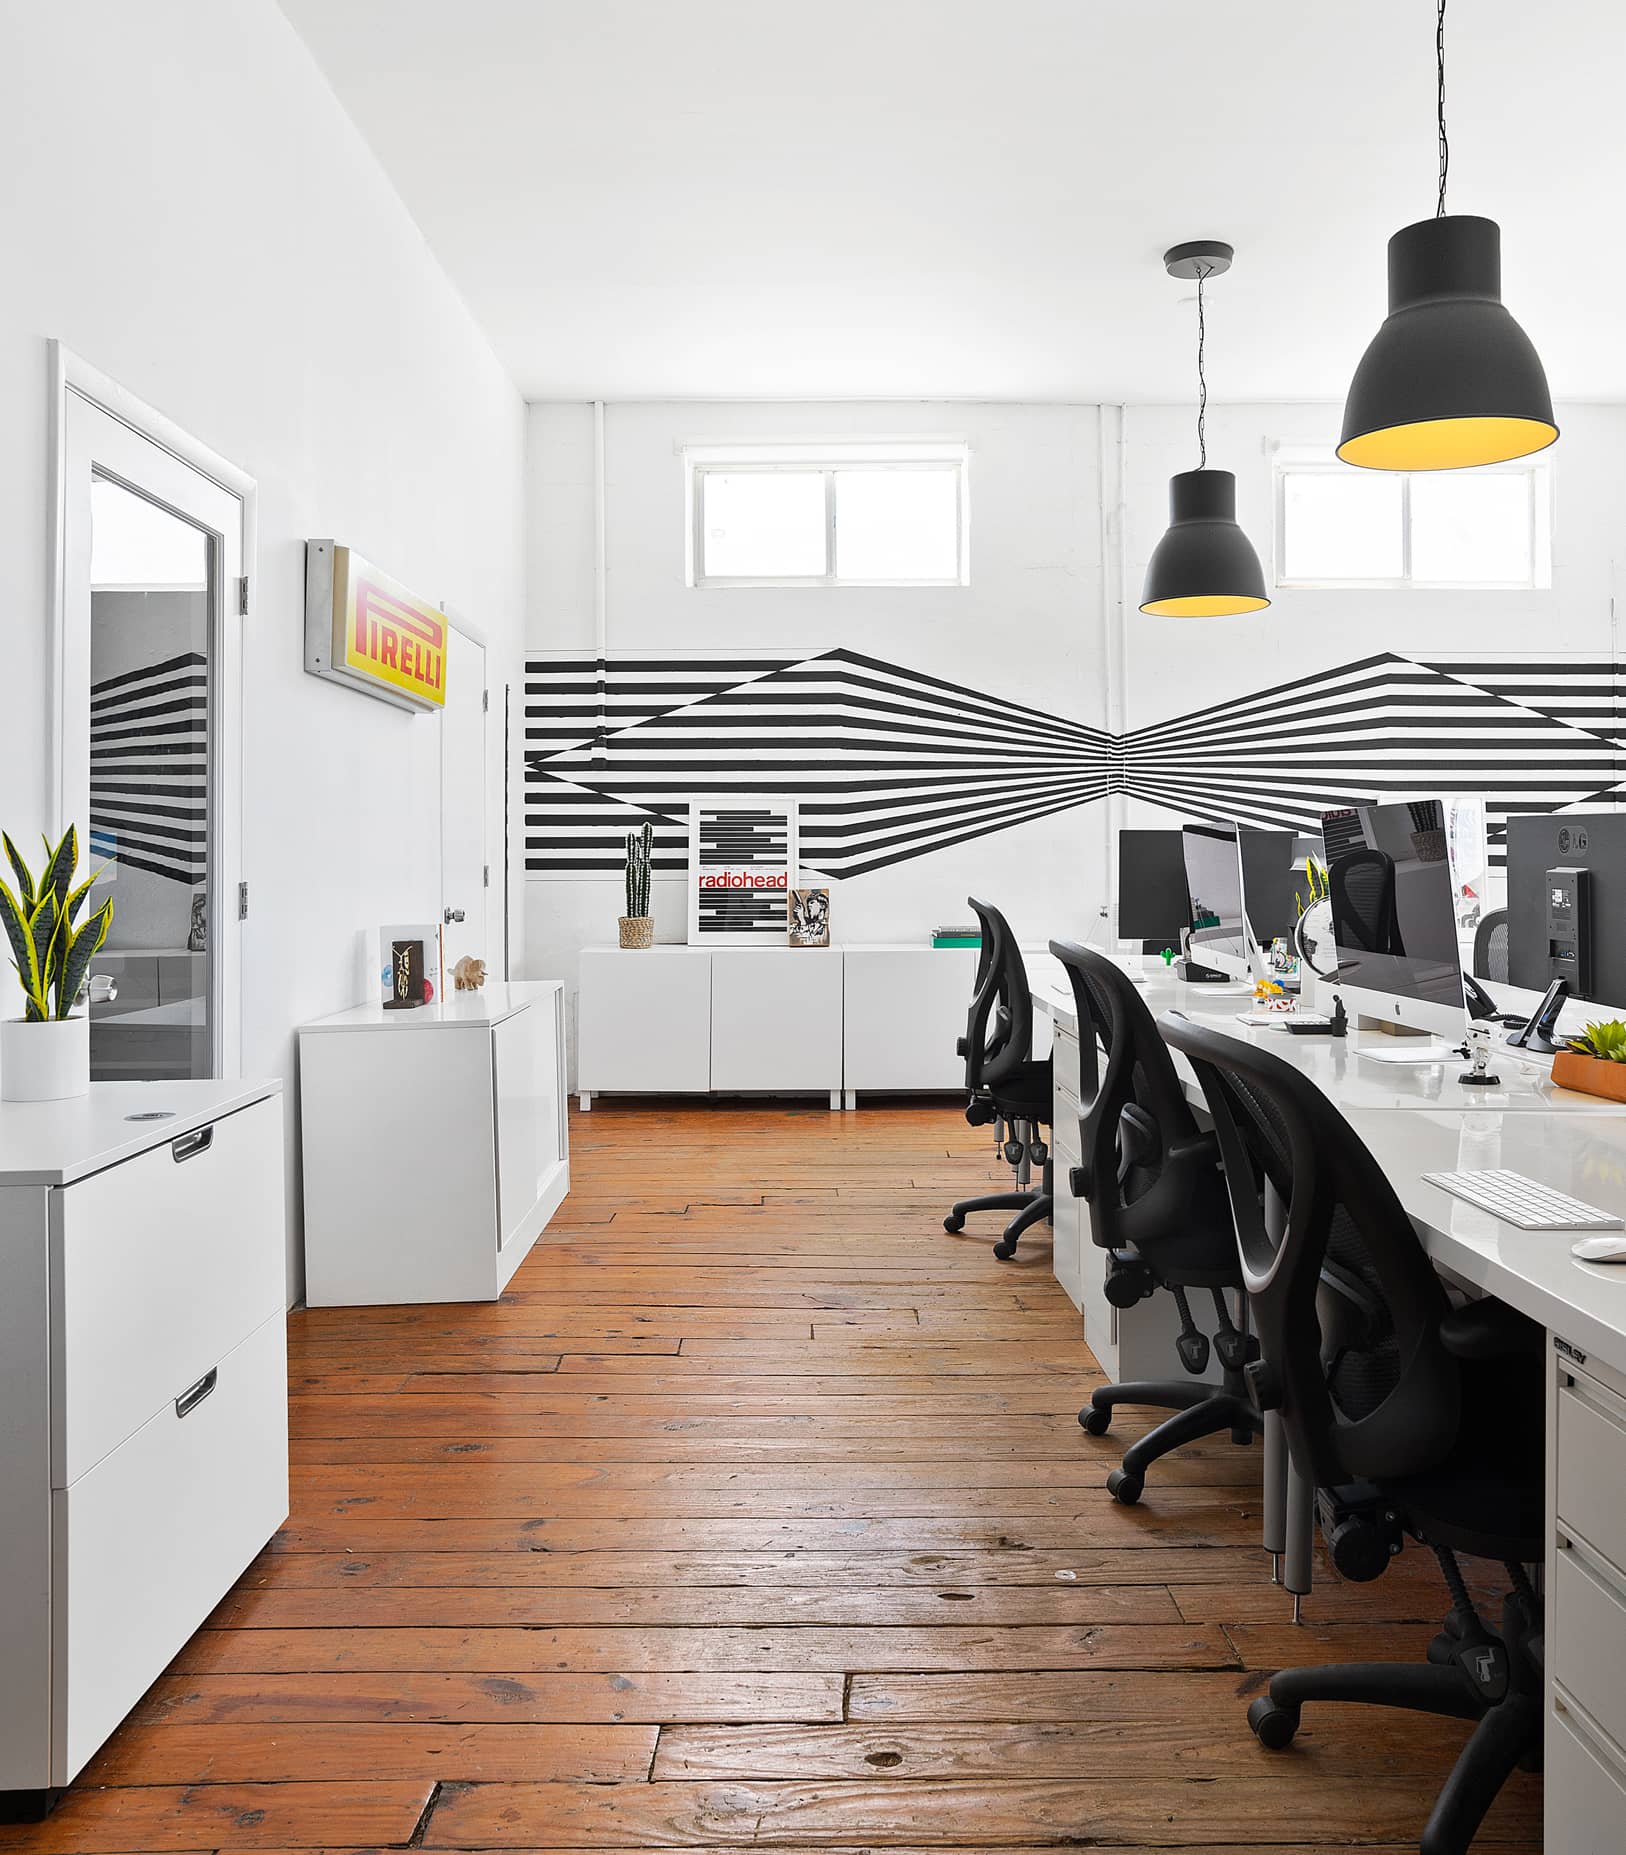 Studio workstations area with artistic paintings on back wall | Think Twice studio